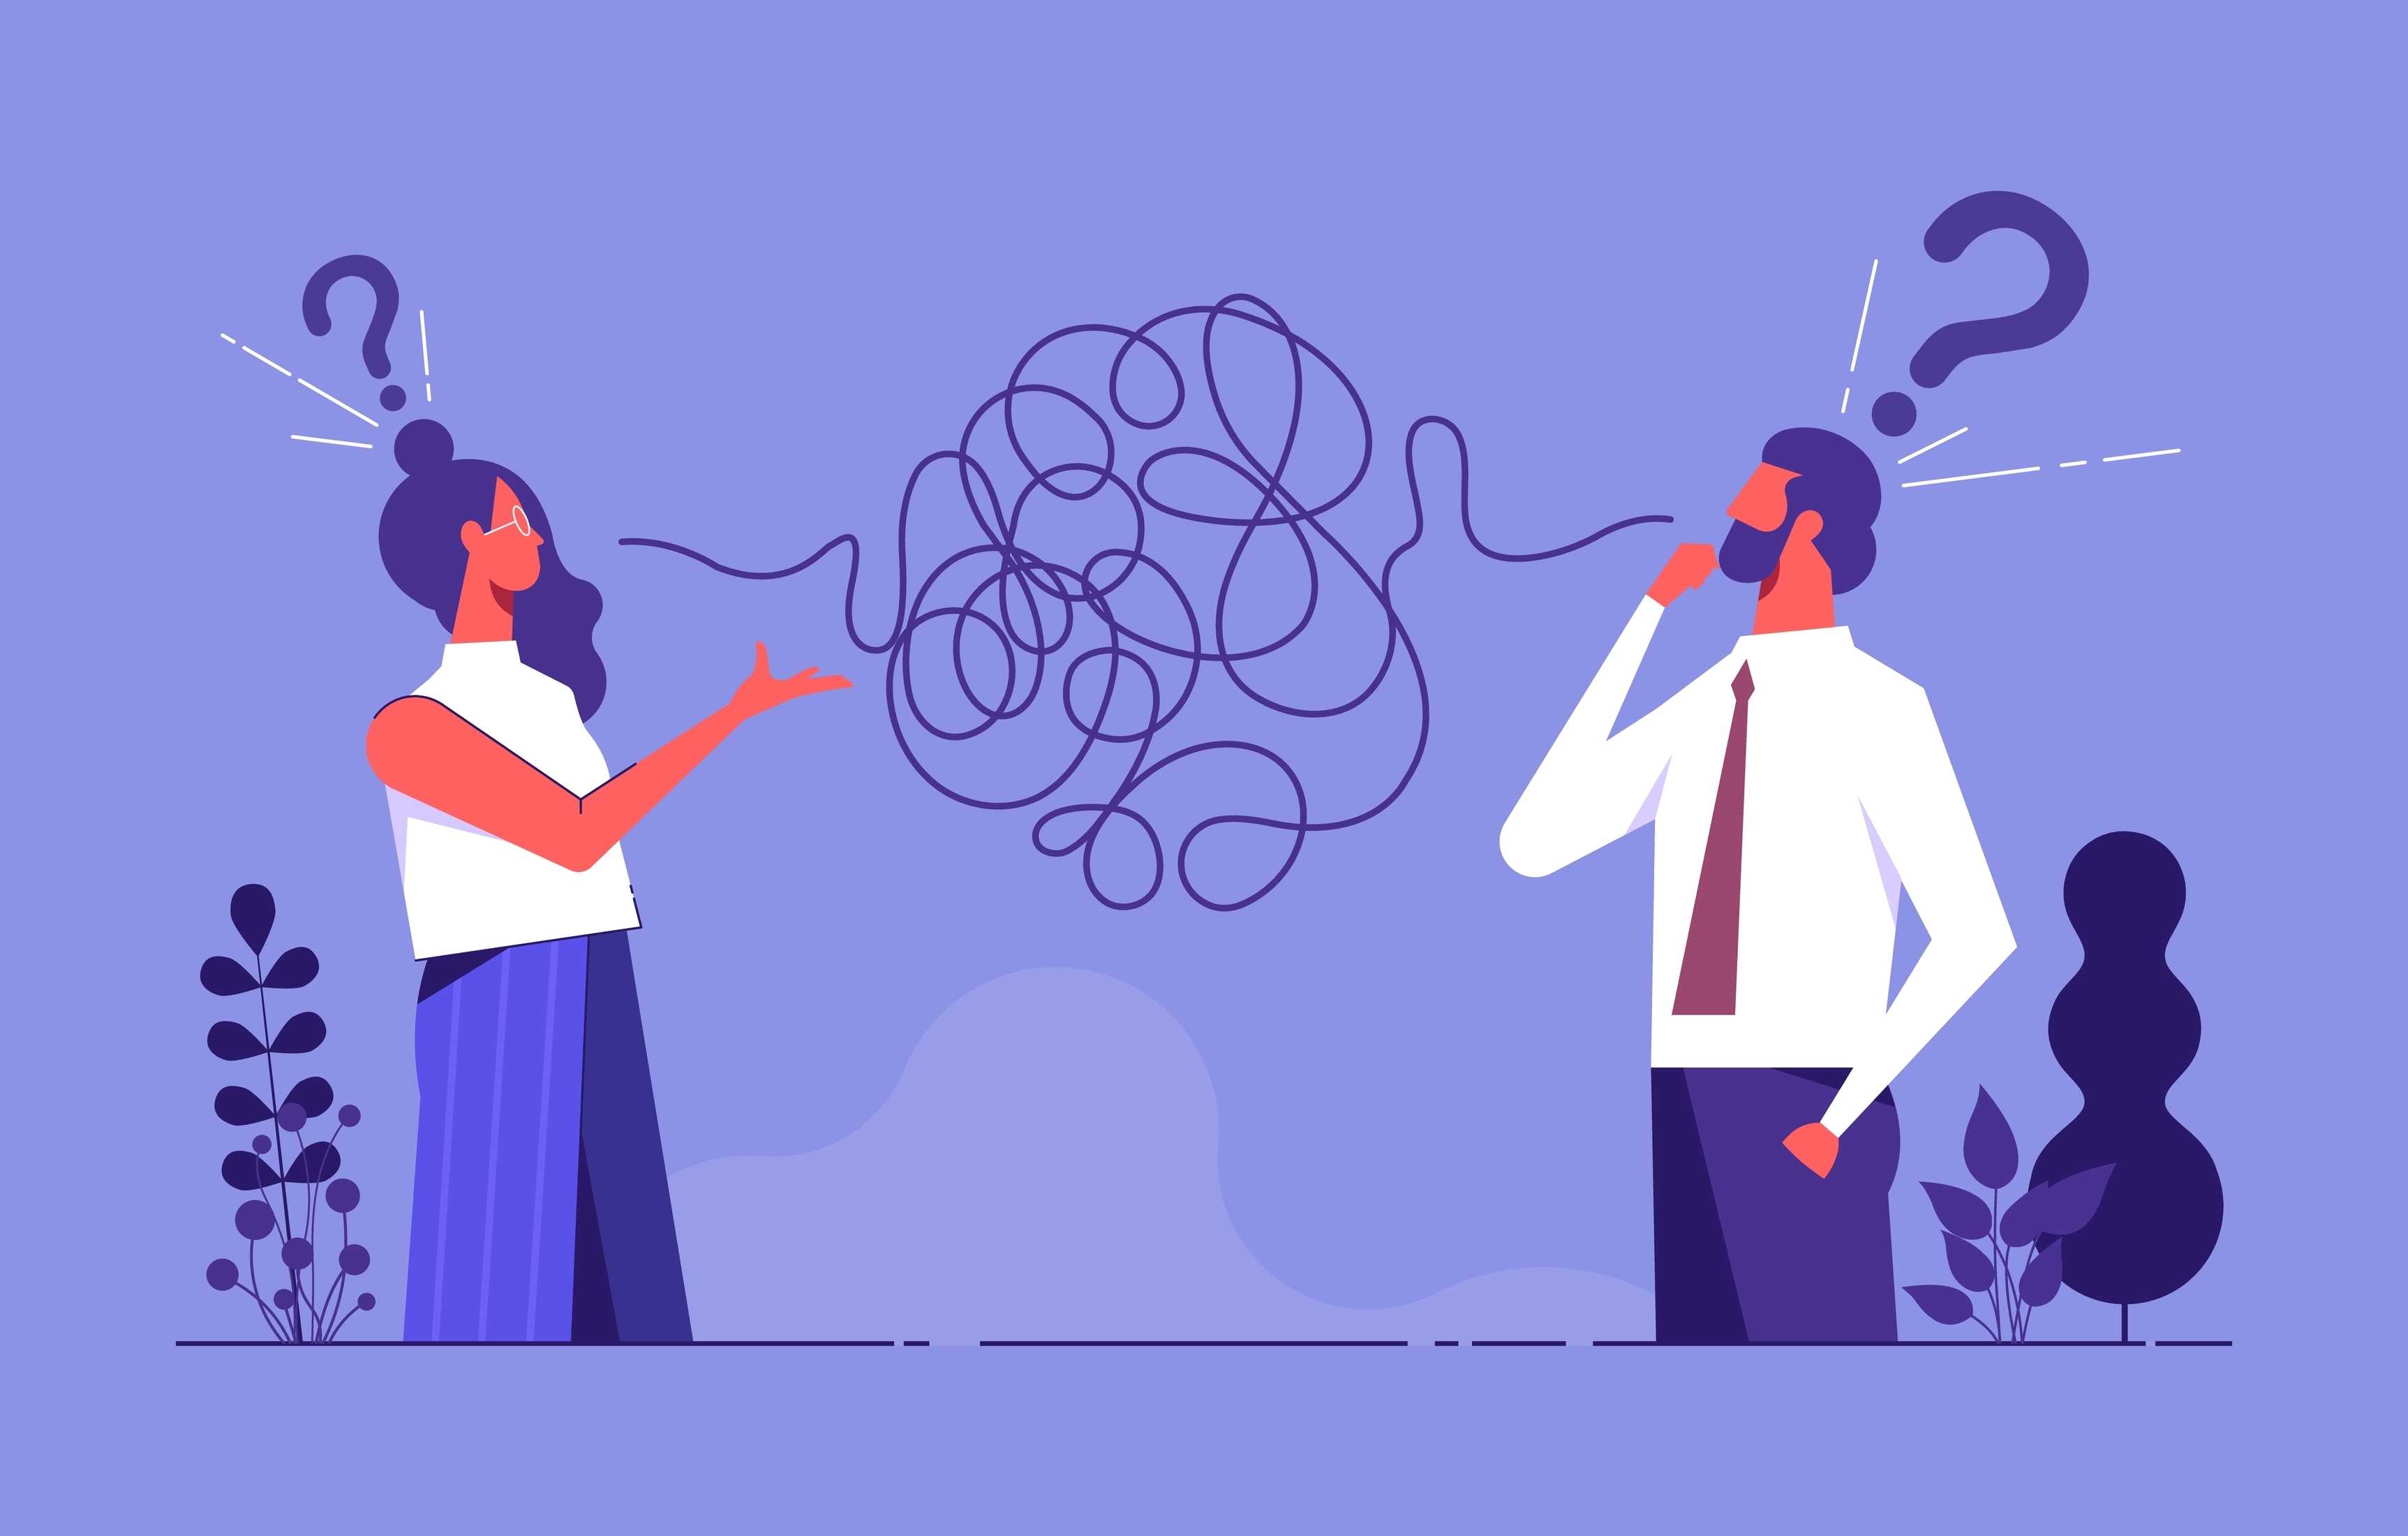 Illustration of two people talking set against a light purple background. They both have question marks above their heads. A line between them denoting communication turns into a tangled ball hovering between them.